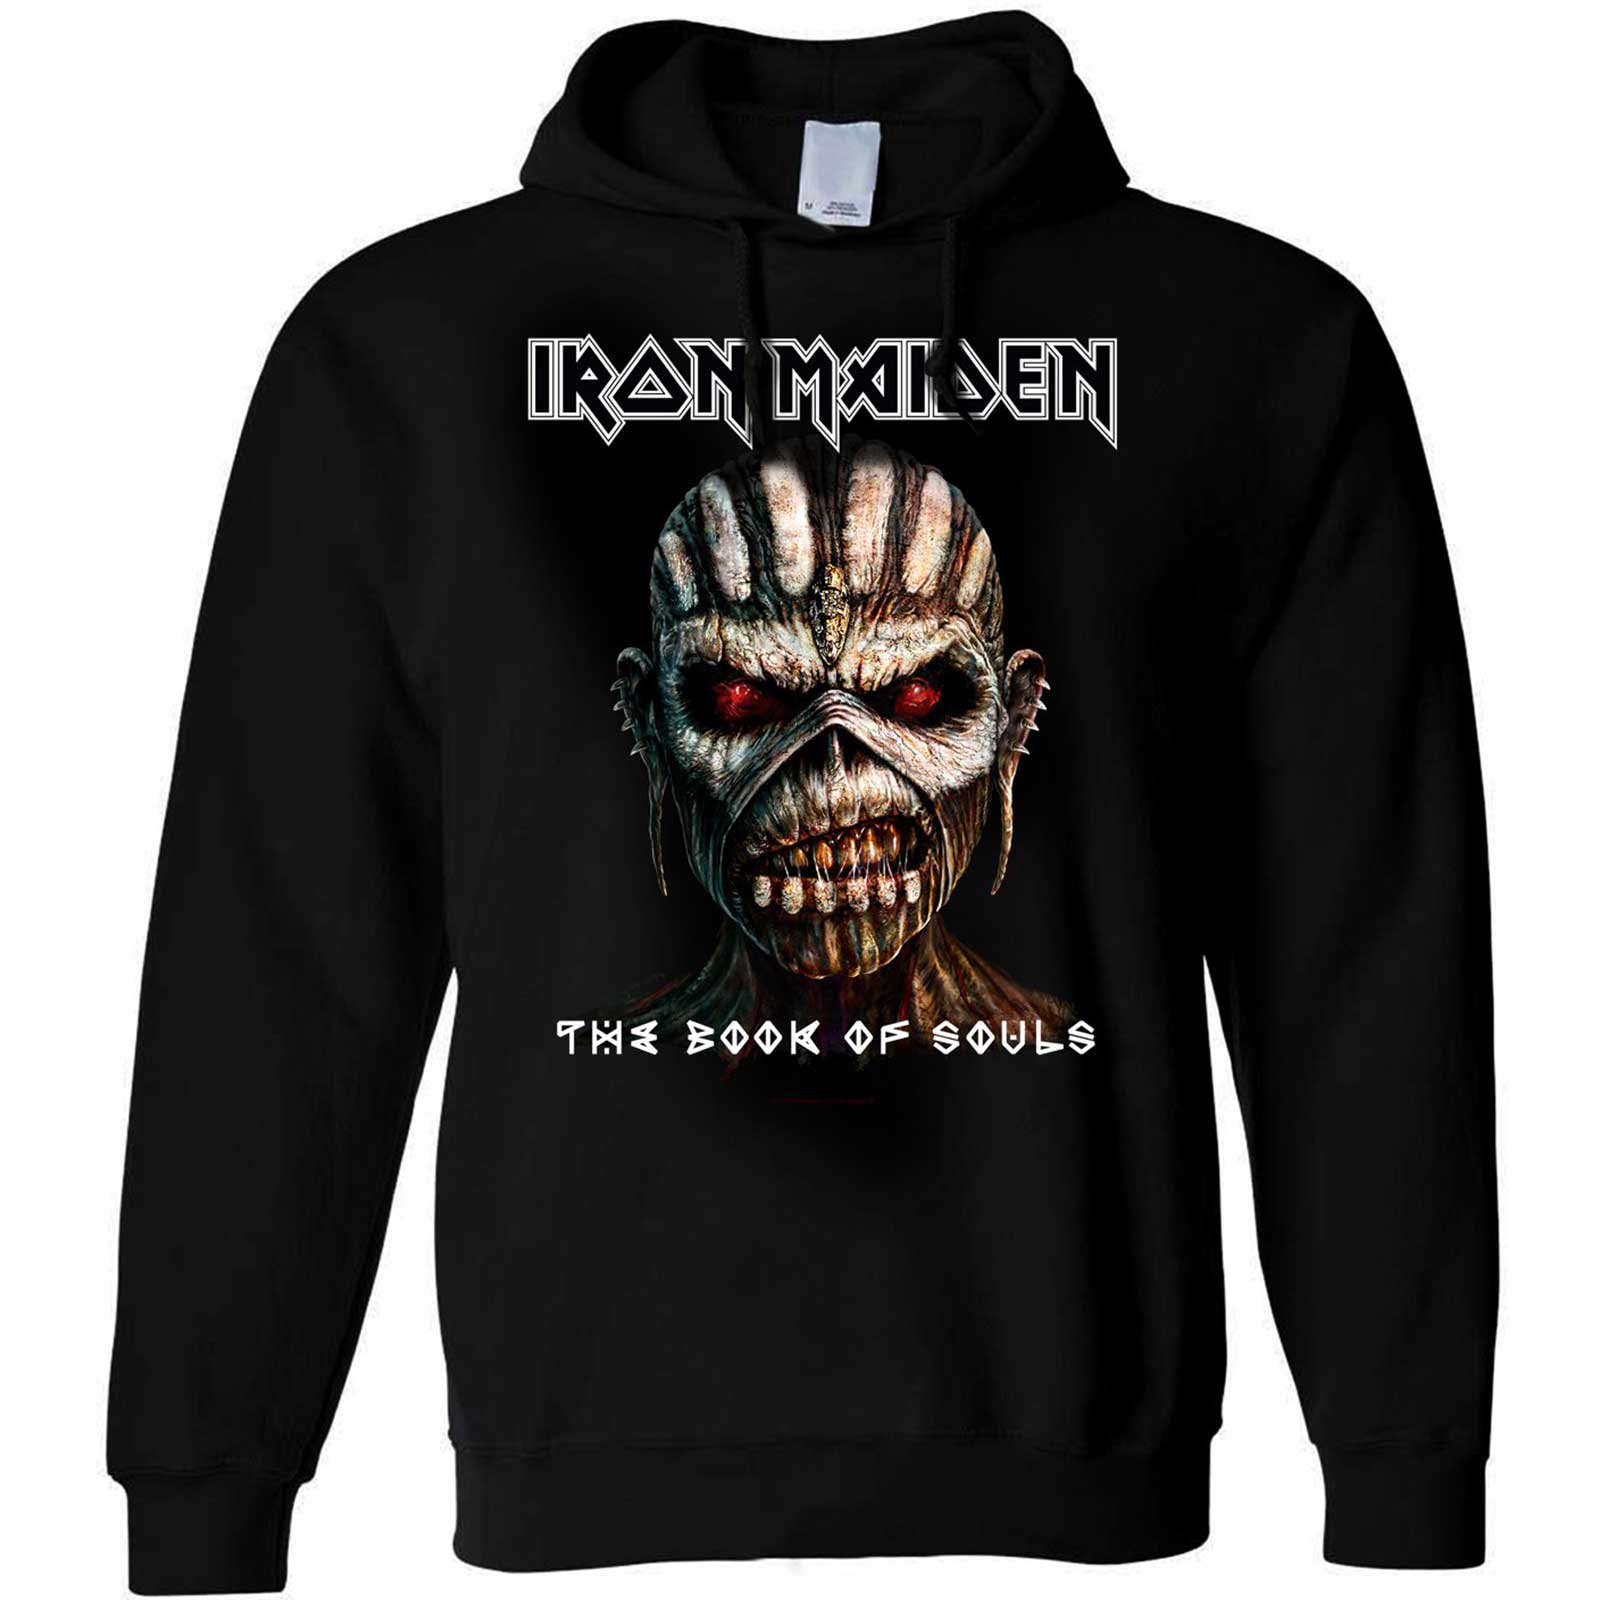 Iron Maiden Unisex Hoodie- The Book of Souls - Official Licensed Design - Jelly Frog